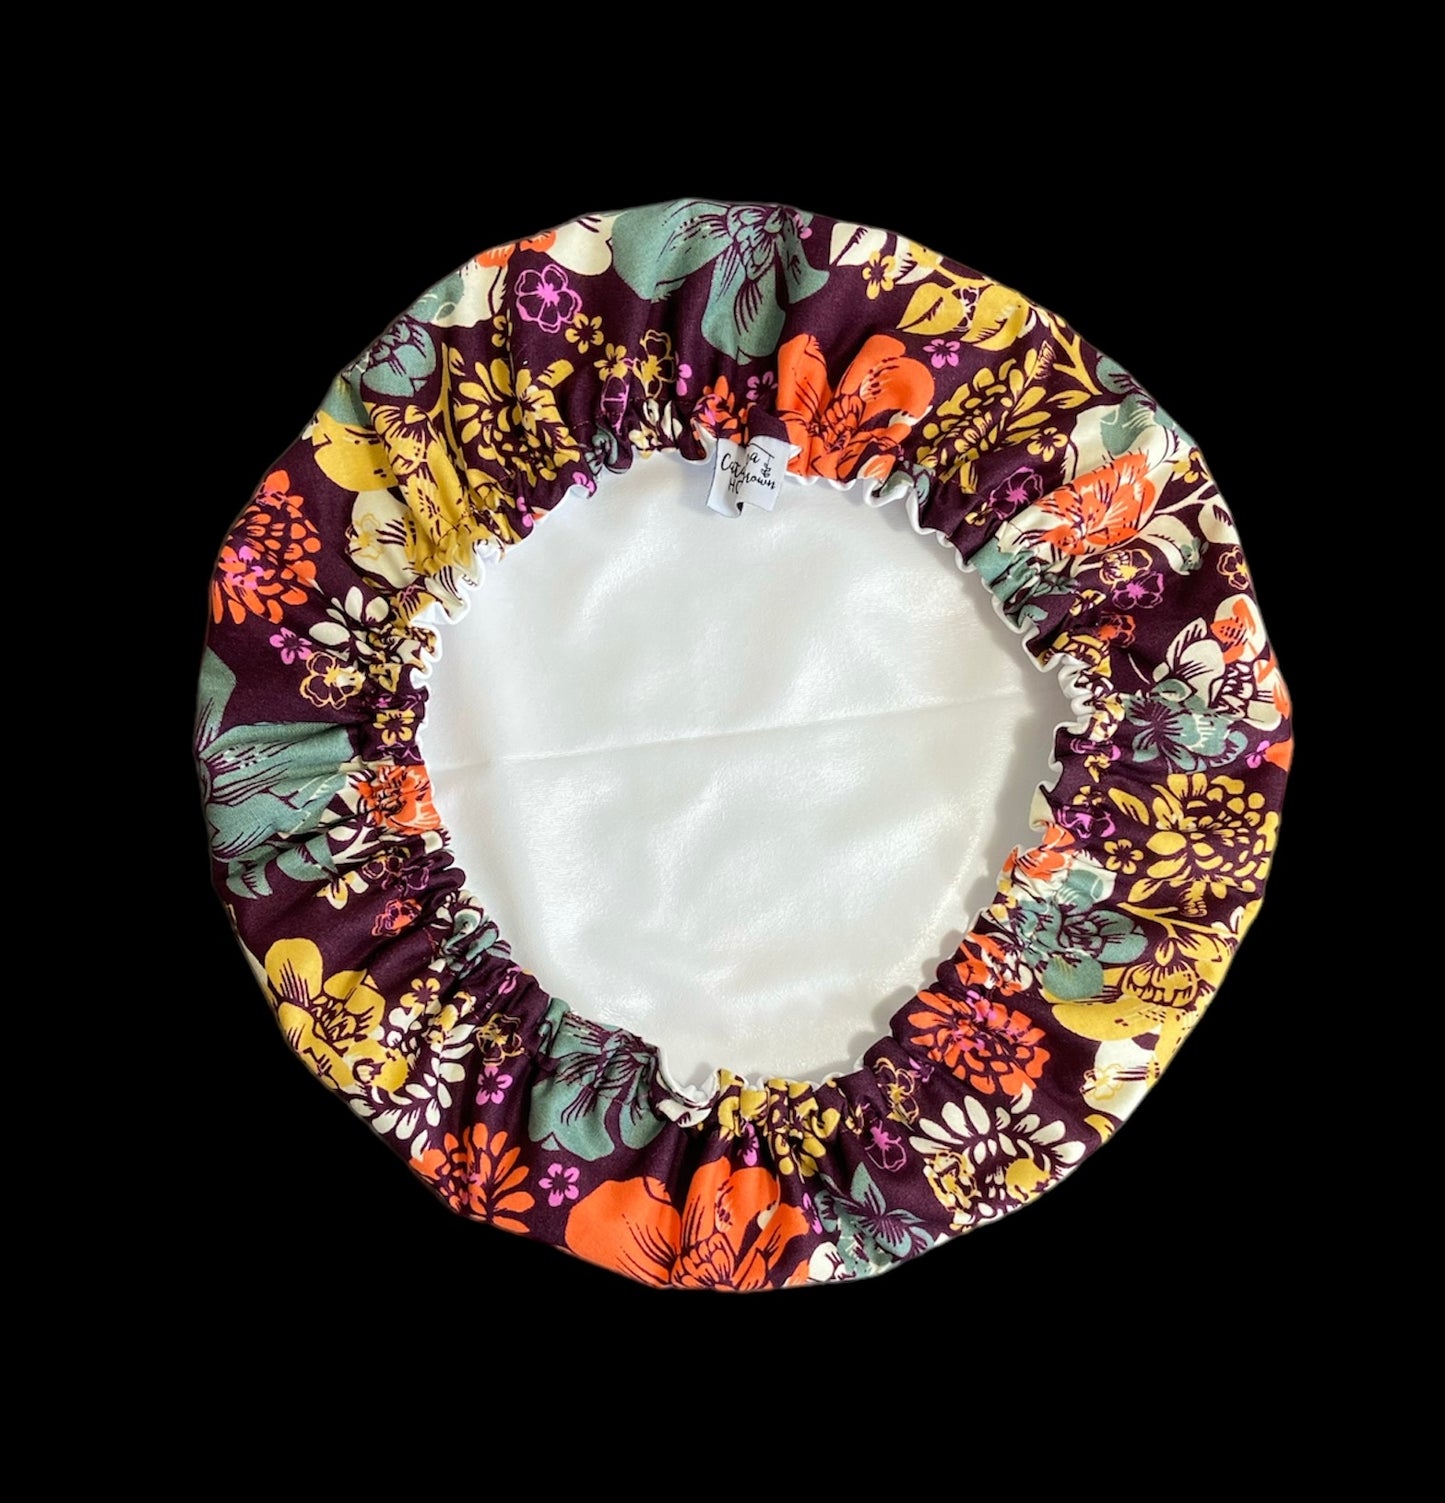 Reusable Bowl Cover (Burgundy floral fabric)